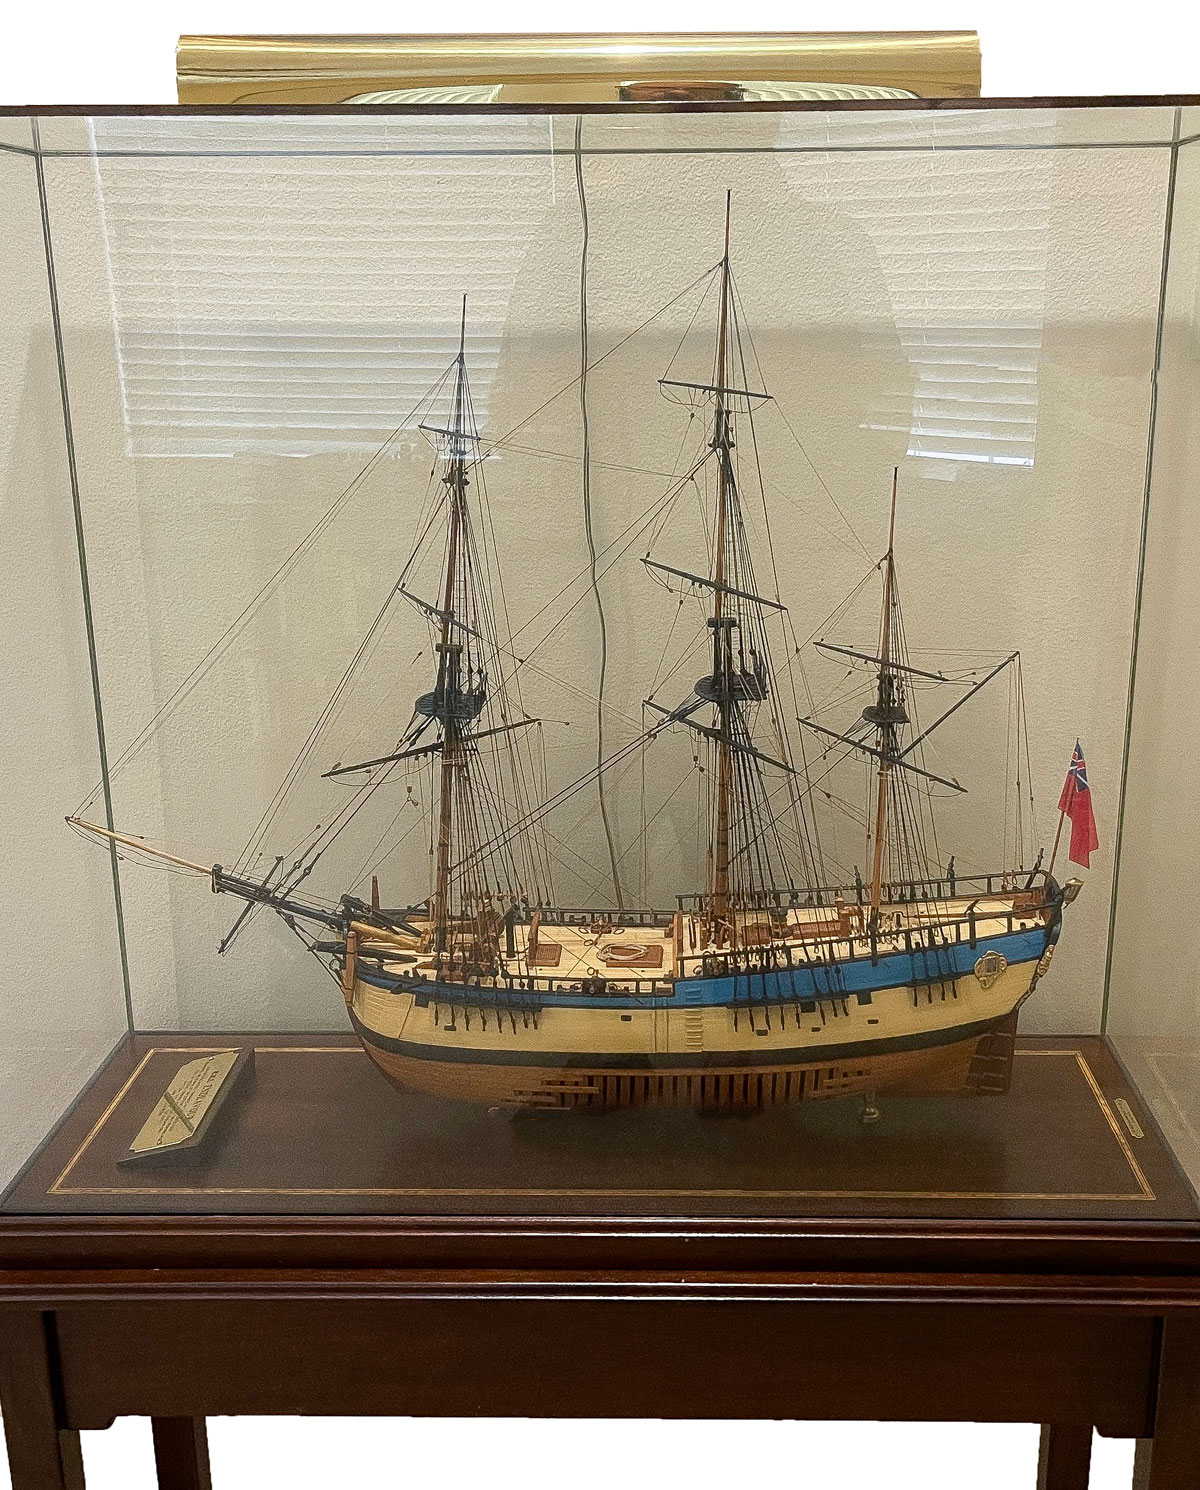 H M S ENDEAVOUR SHIP MODEL by HENRY 36c0a3